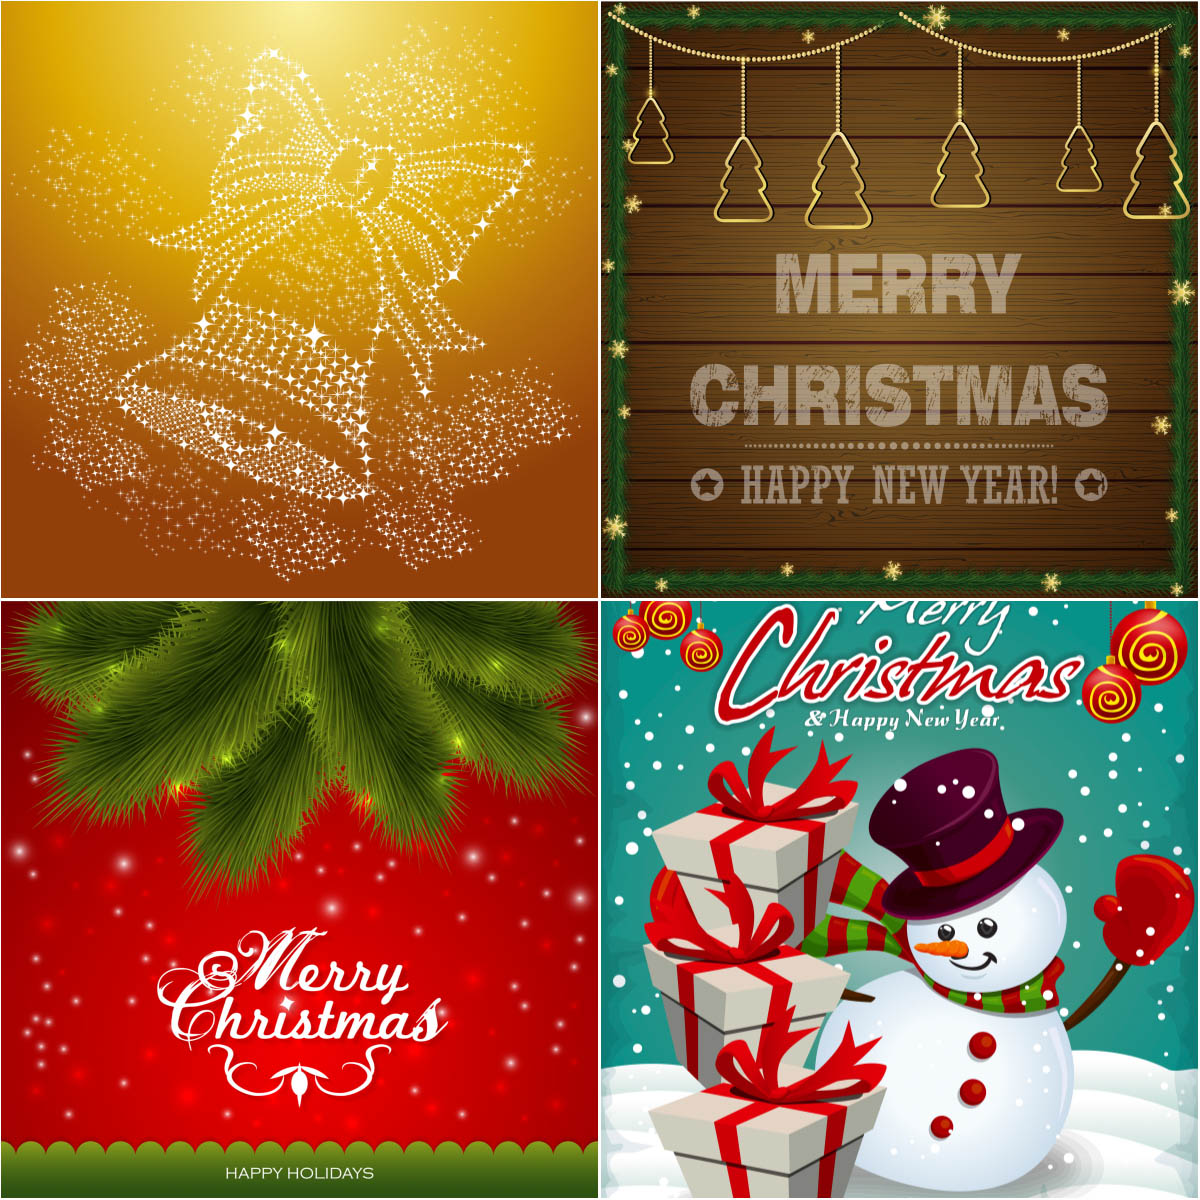 Christmas backgrounds with bell, snowman and gifts